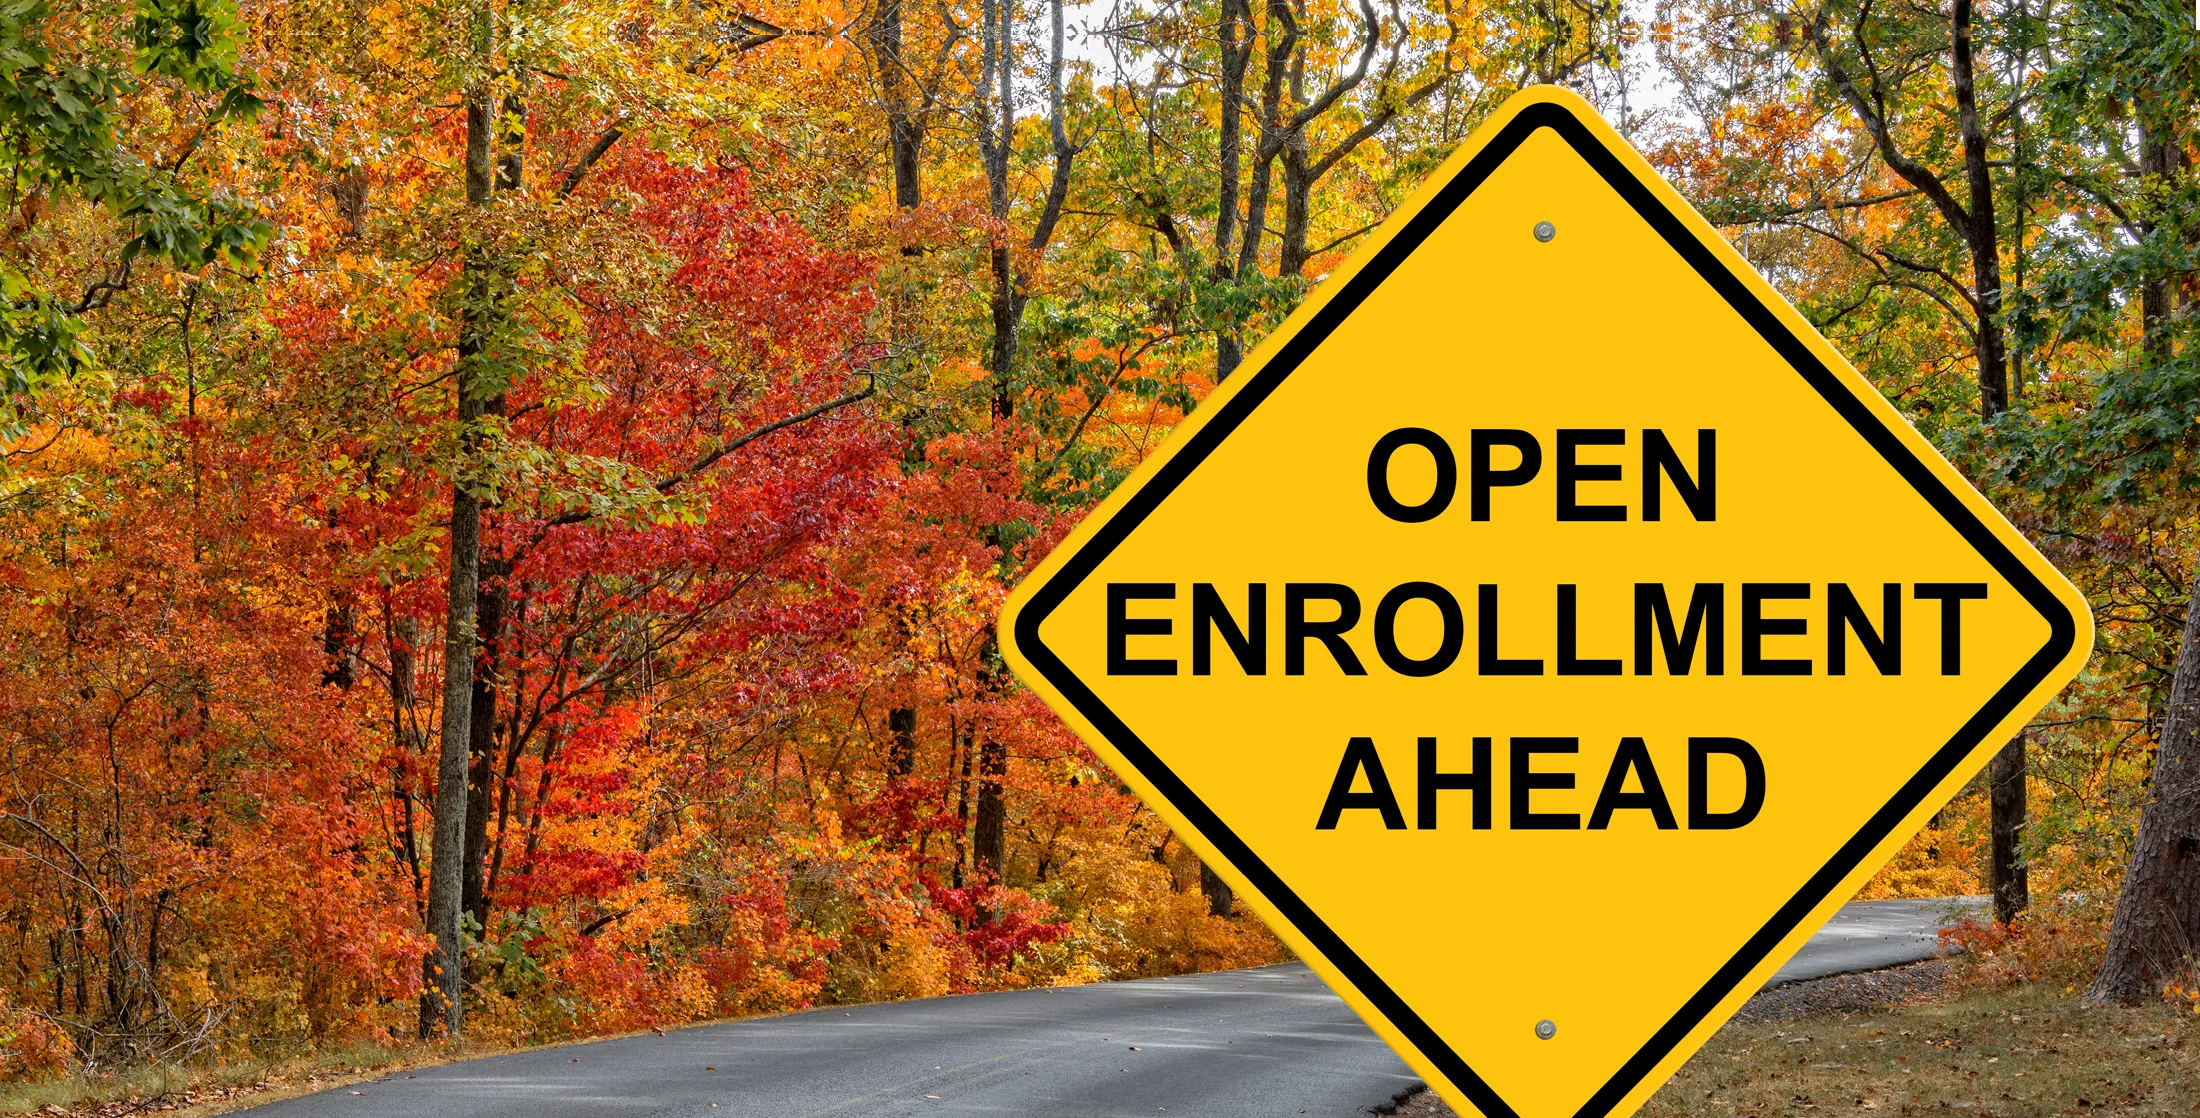 Open Enrollment Ahead sign on a country road in the fall